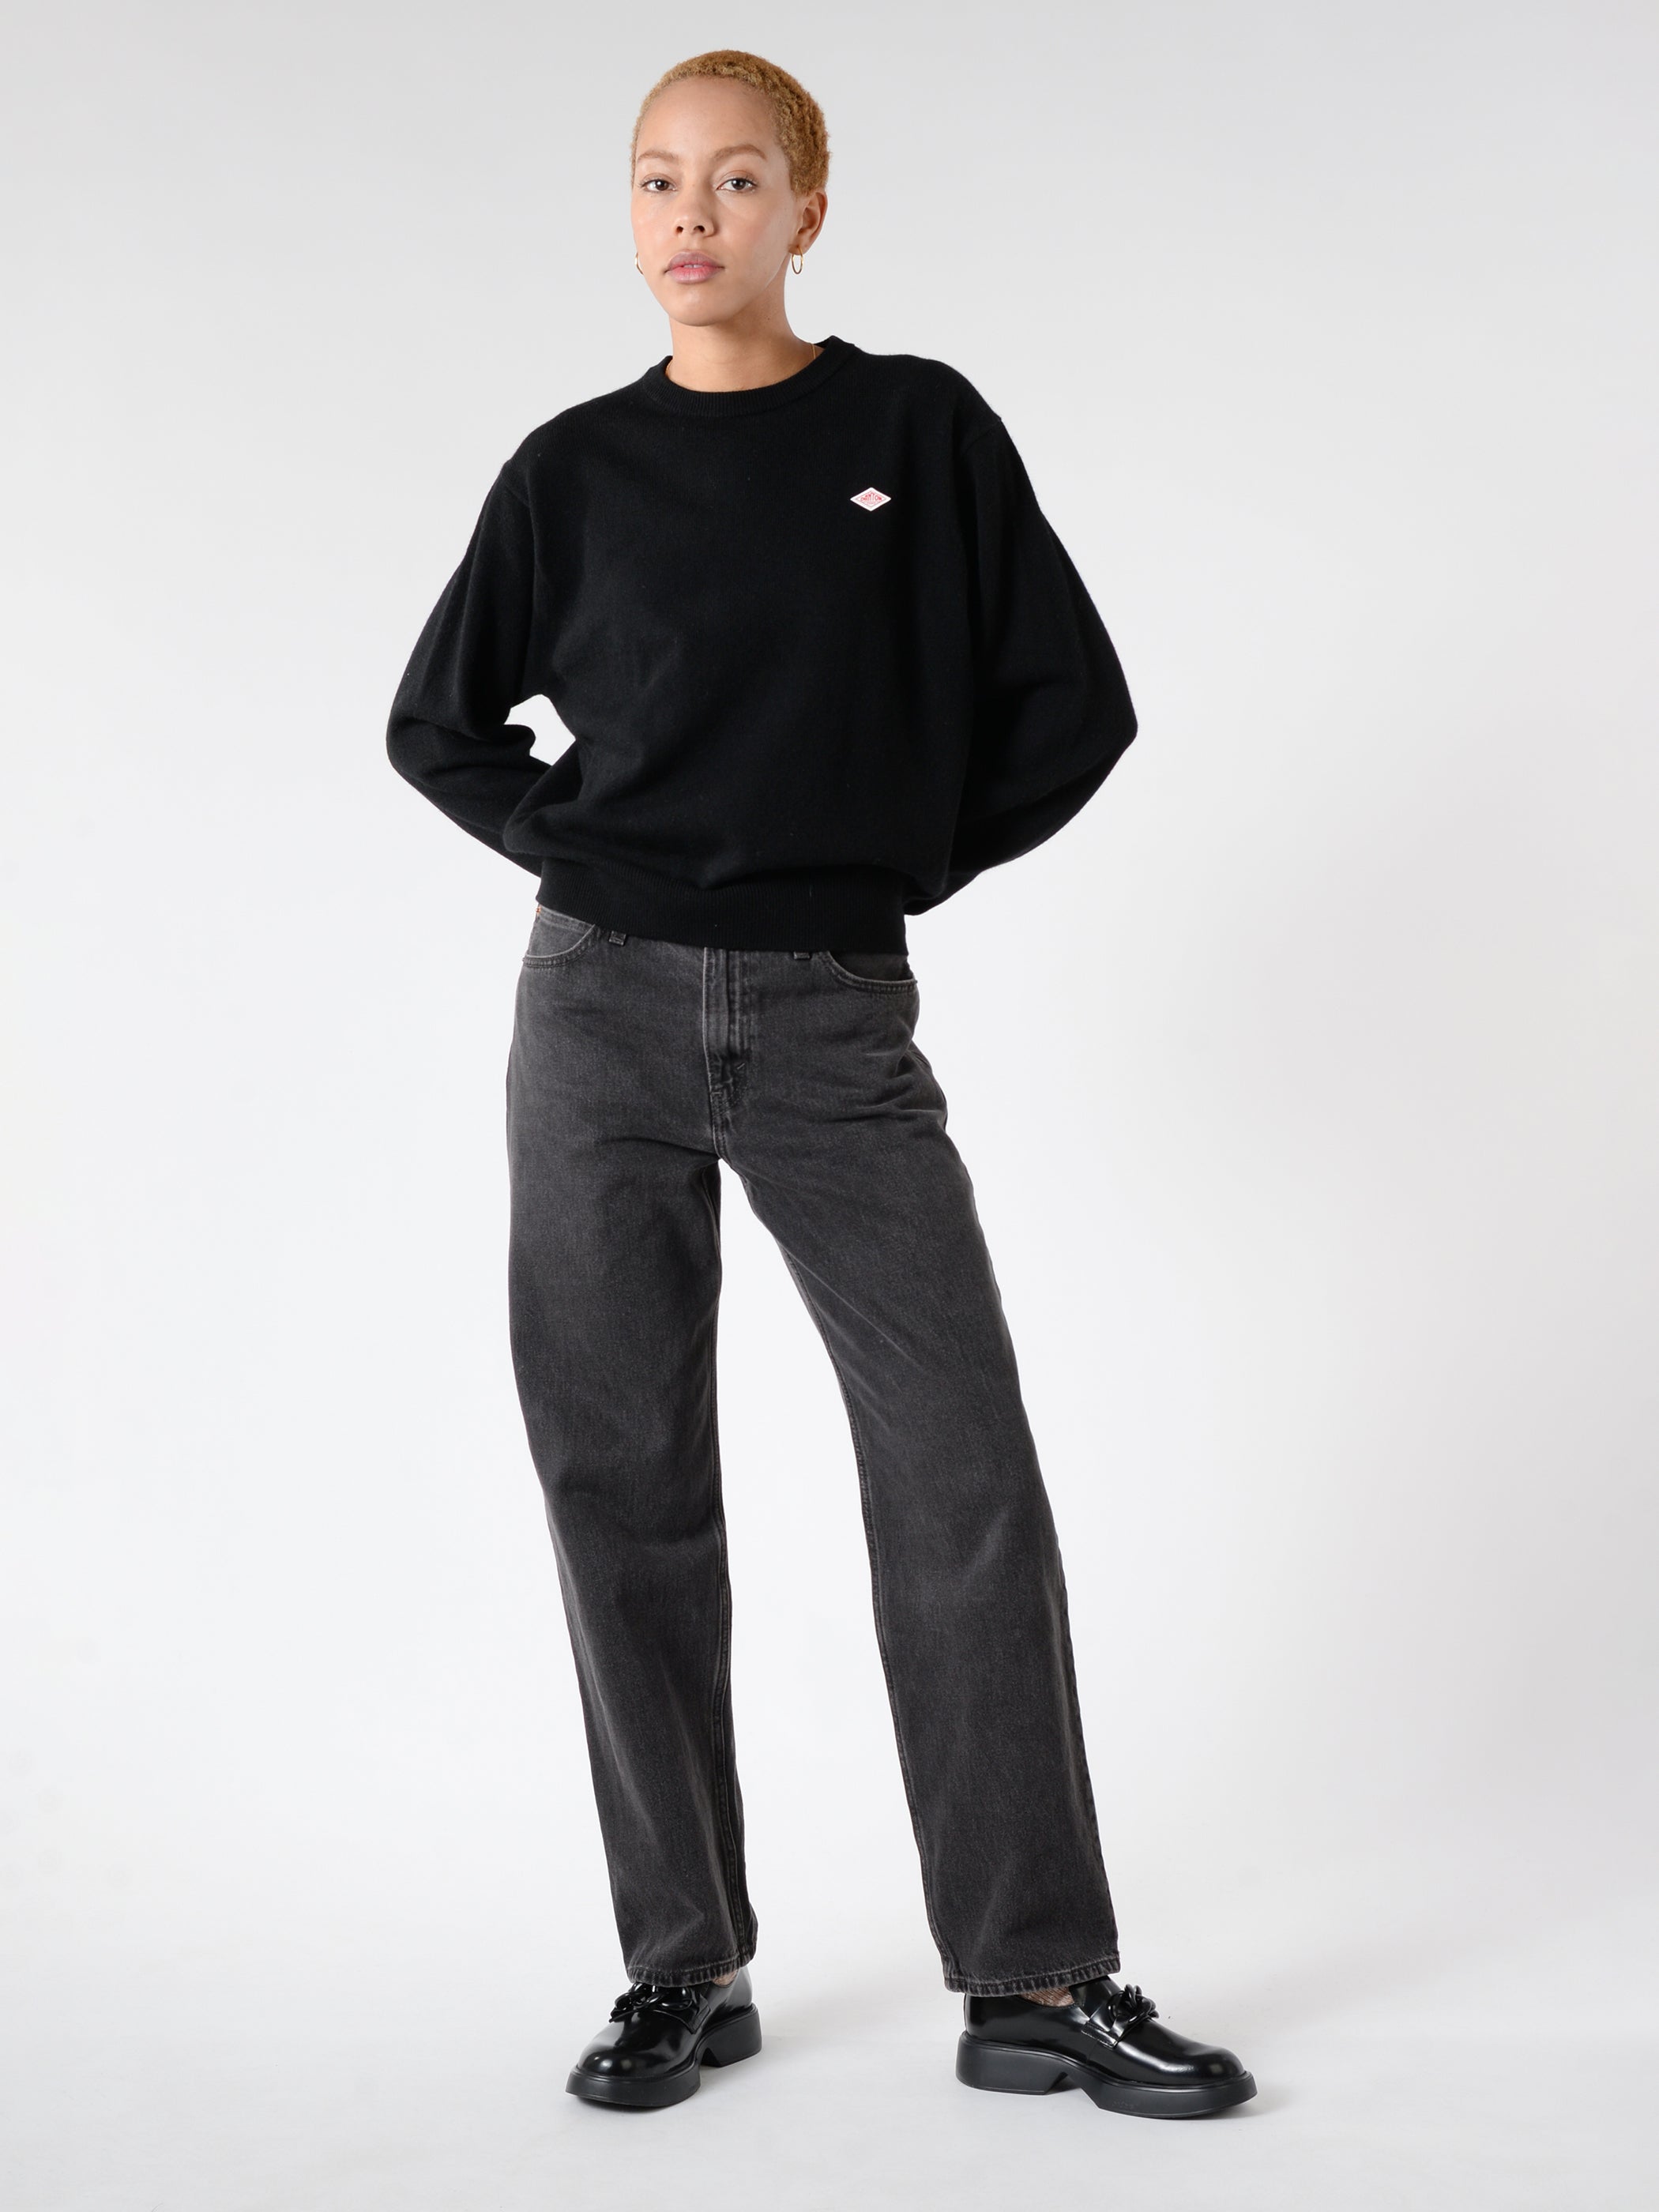 Women's Lambswool Crew Neck Knit Pullover